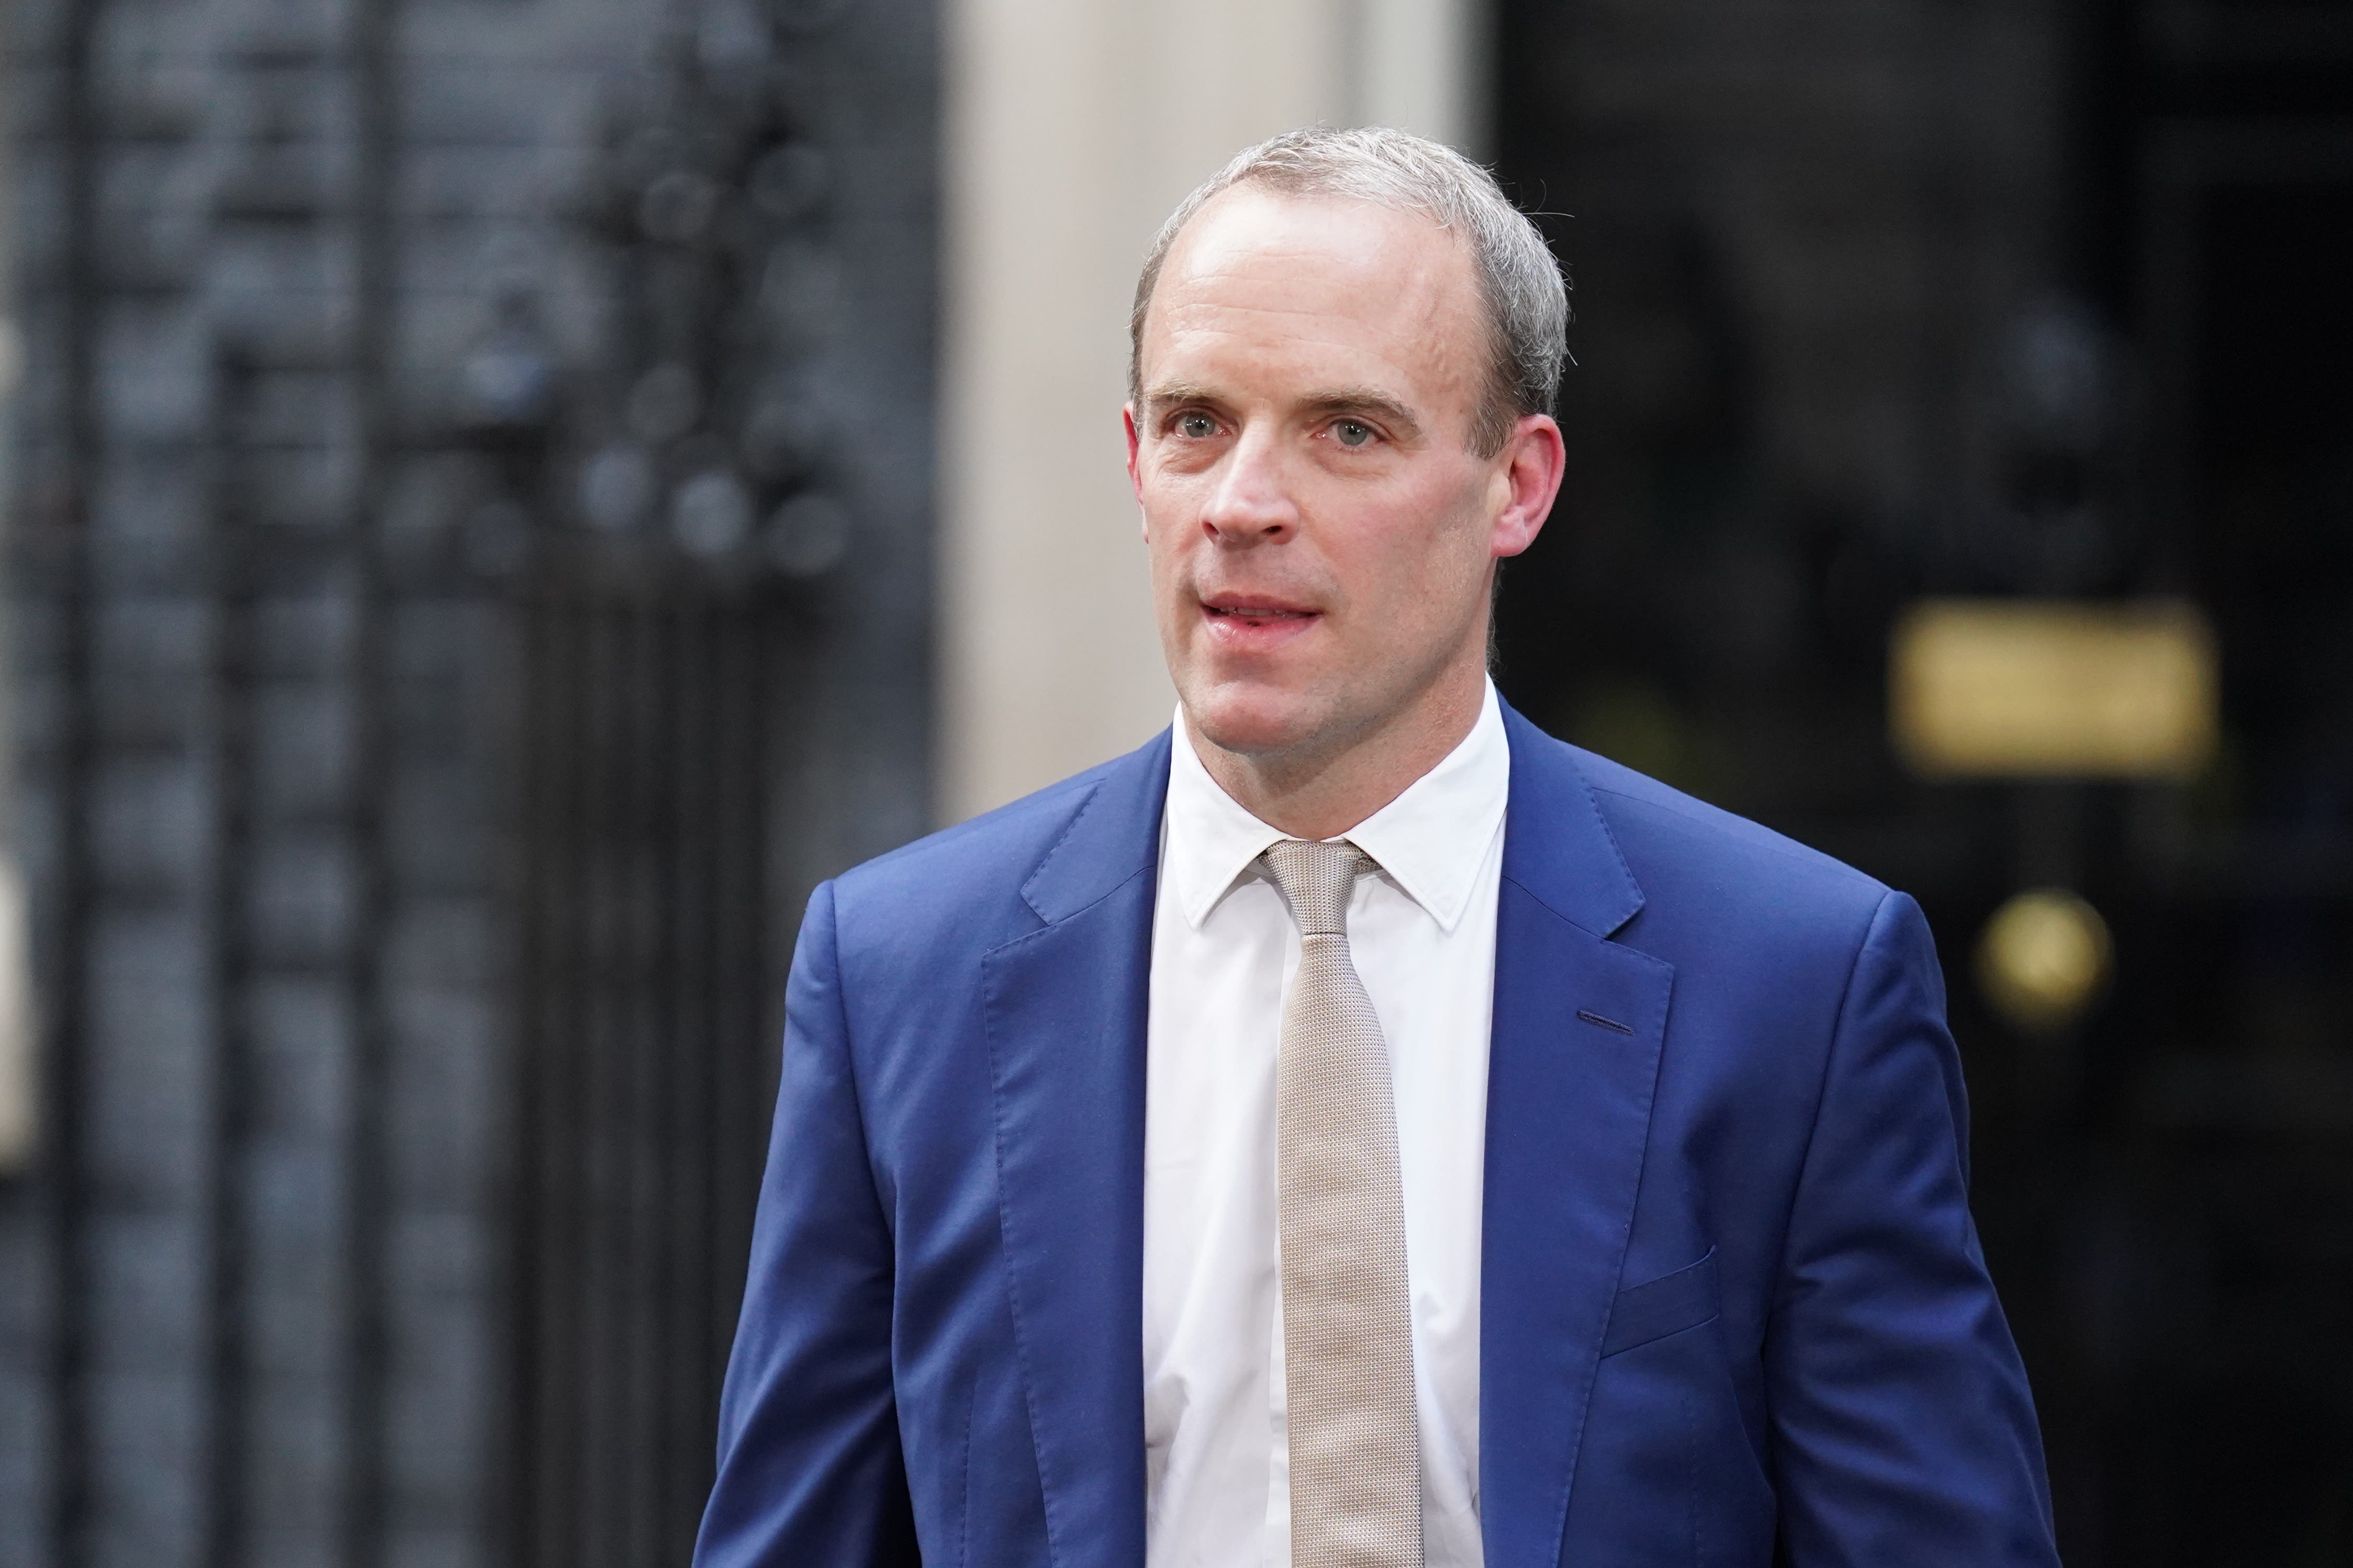 Dominic Raab is to be investigated over claims that he bullied officials